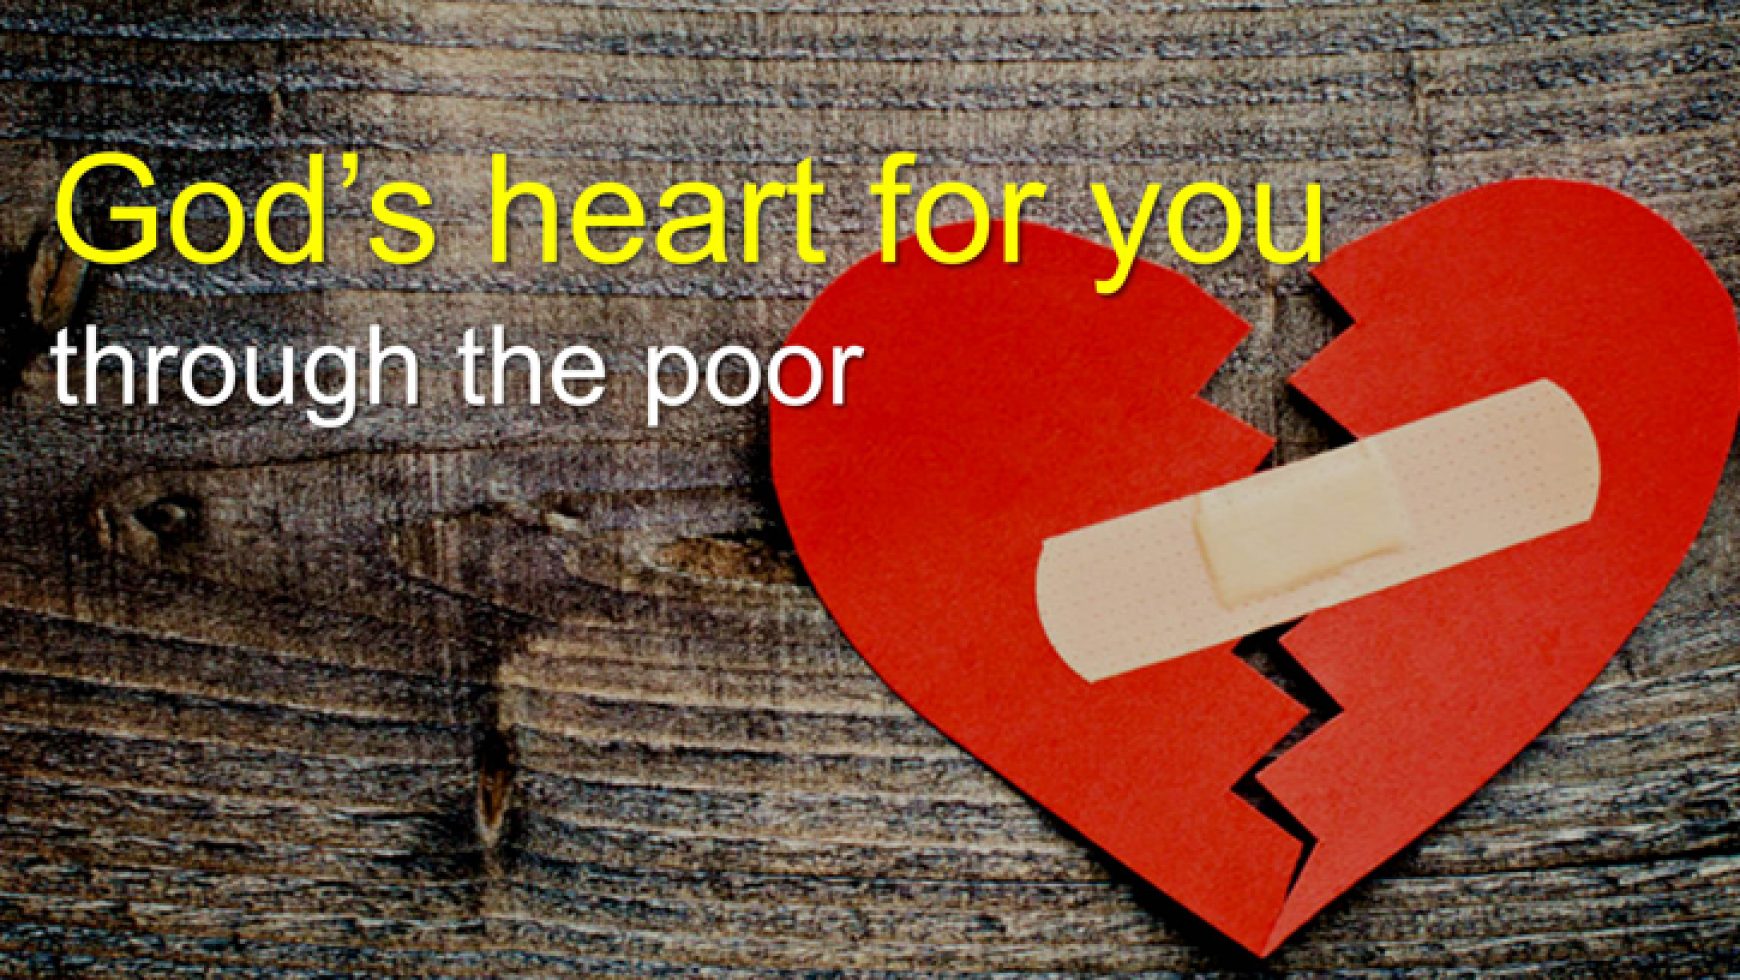 God’s Heart for you through the Poor